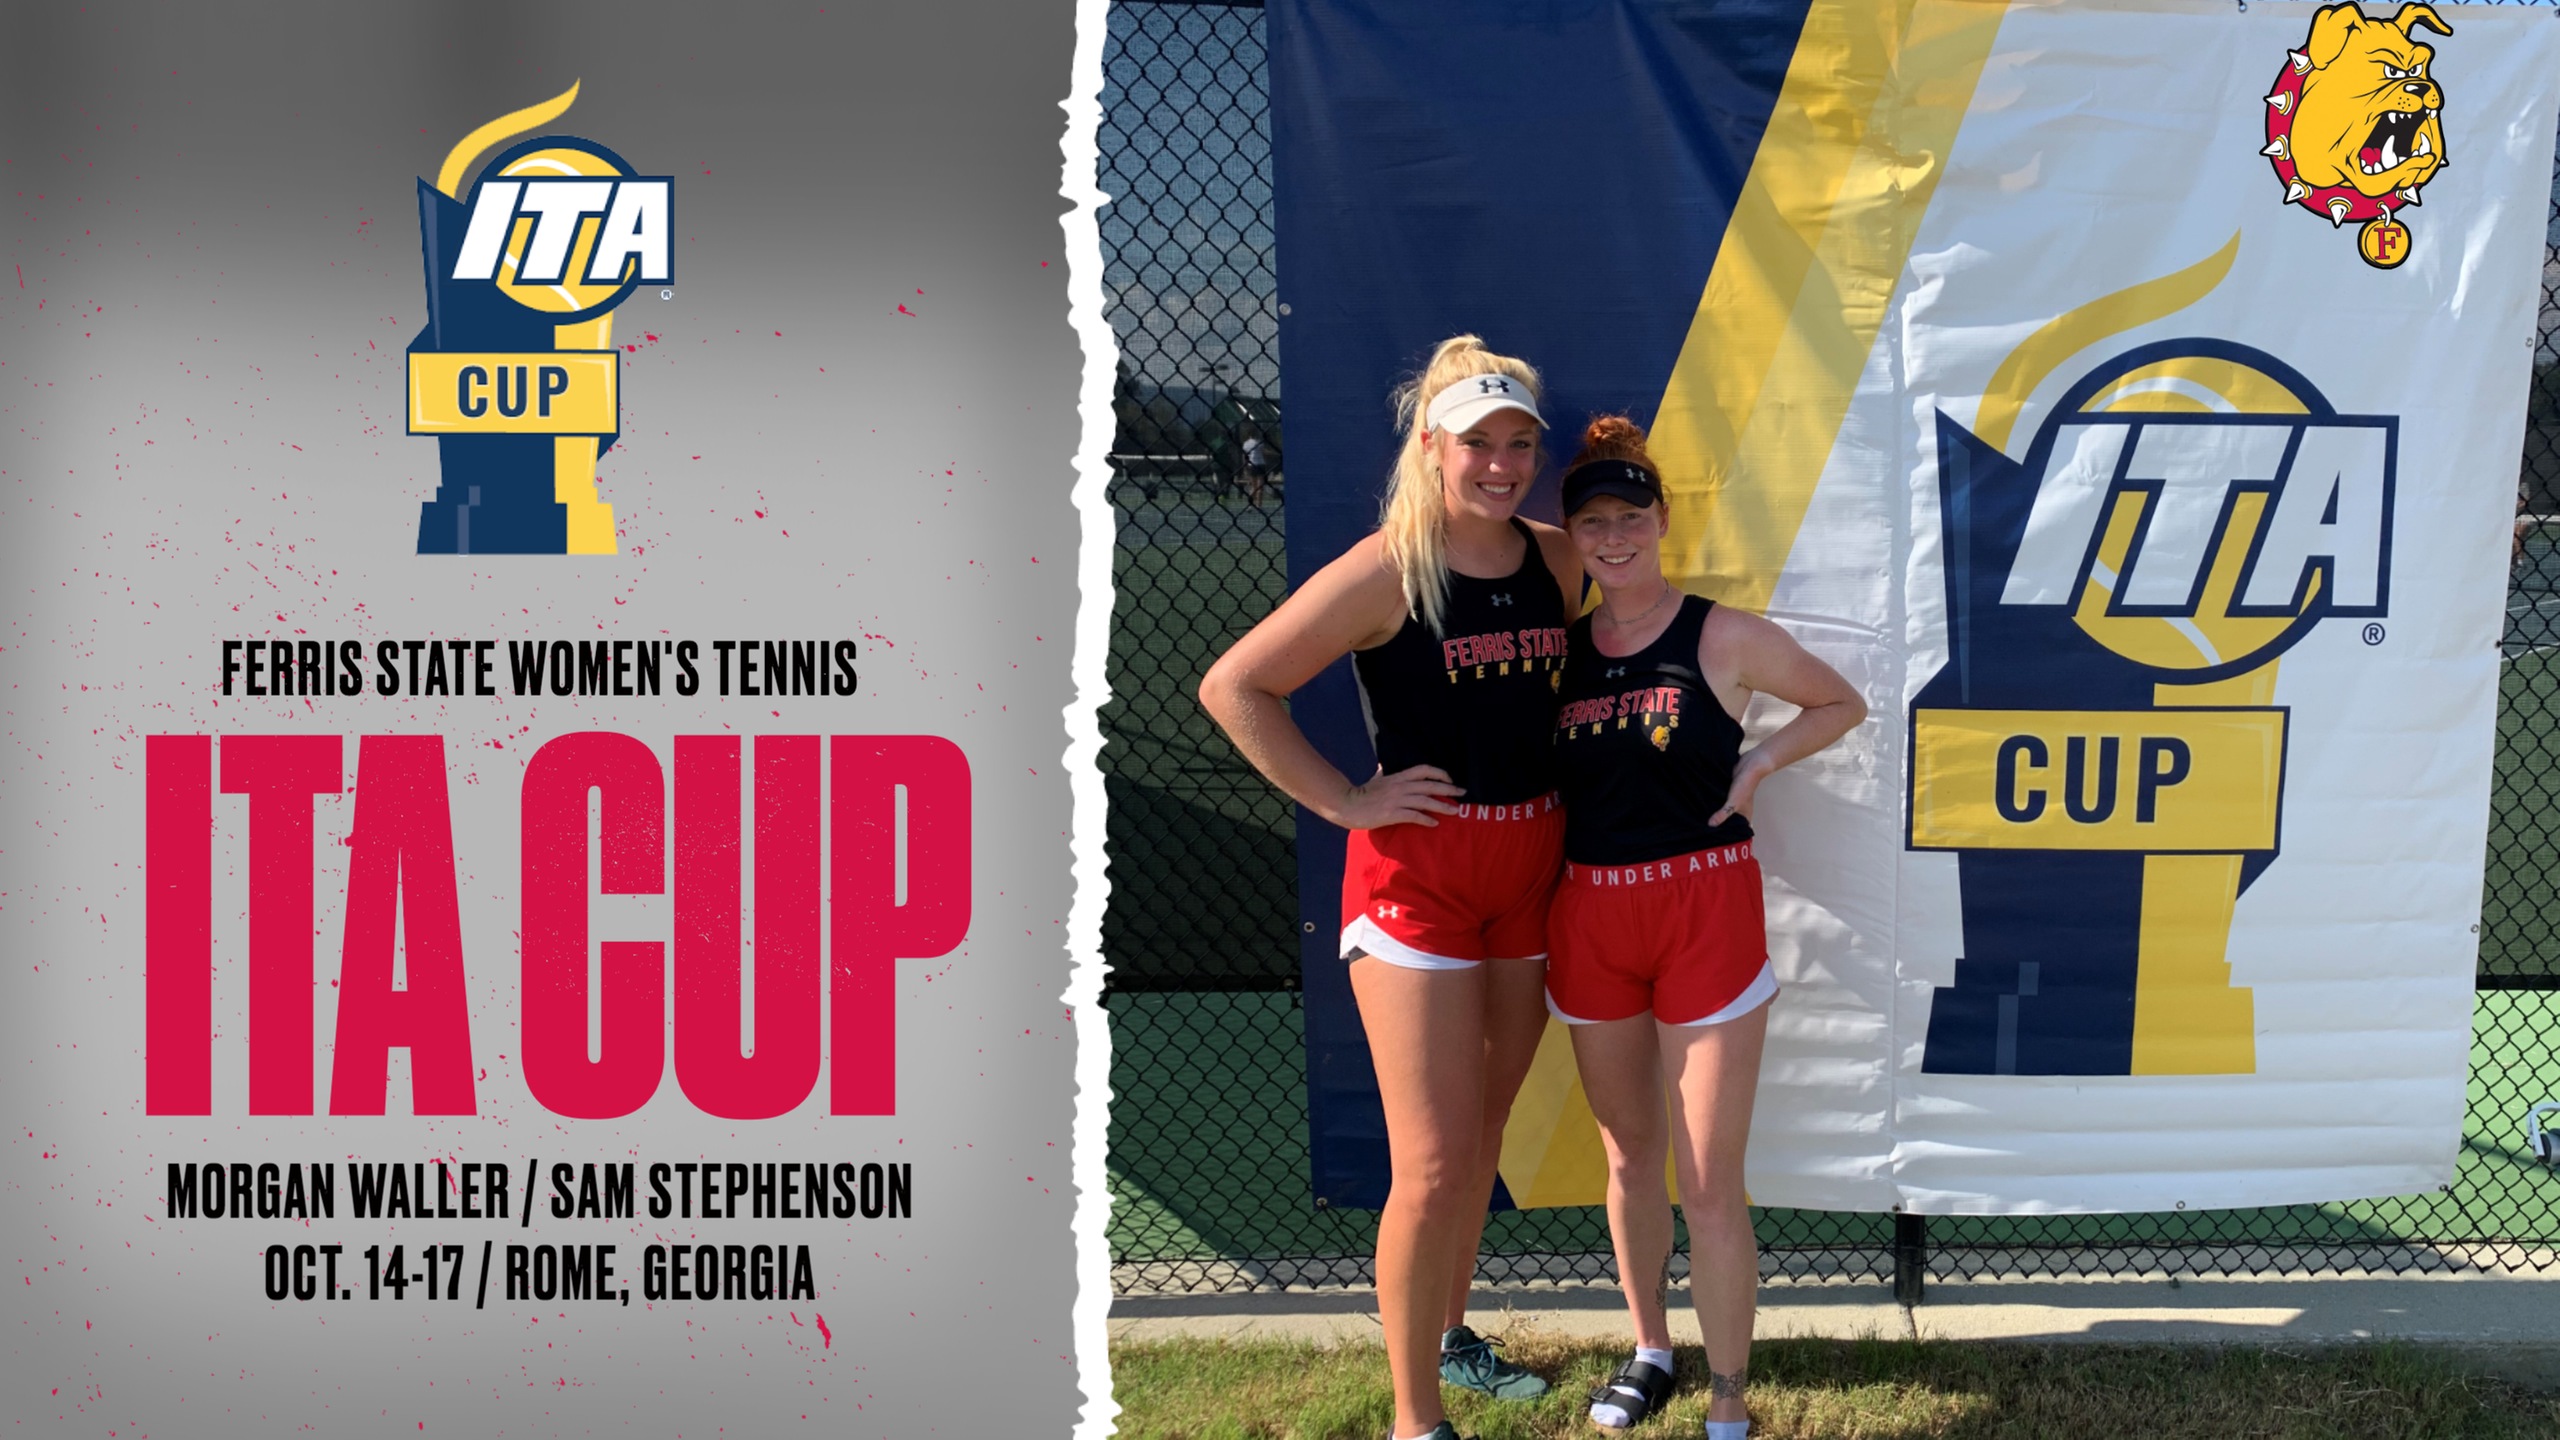 Ferris State's Stephenson And Waller Conclude Action At ITA Cup National Championships